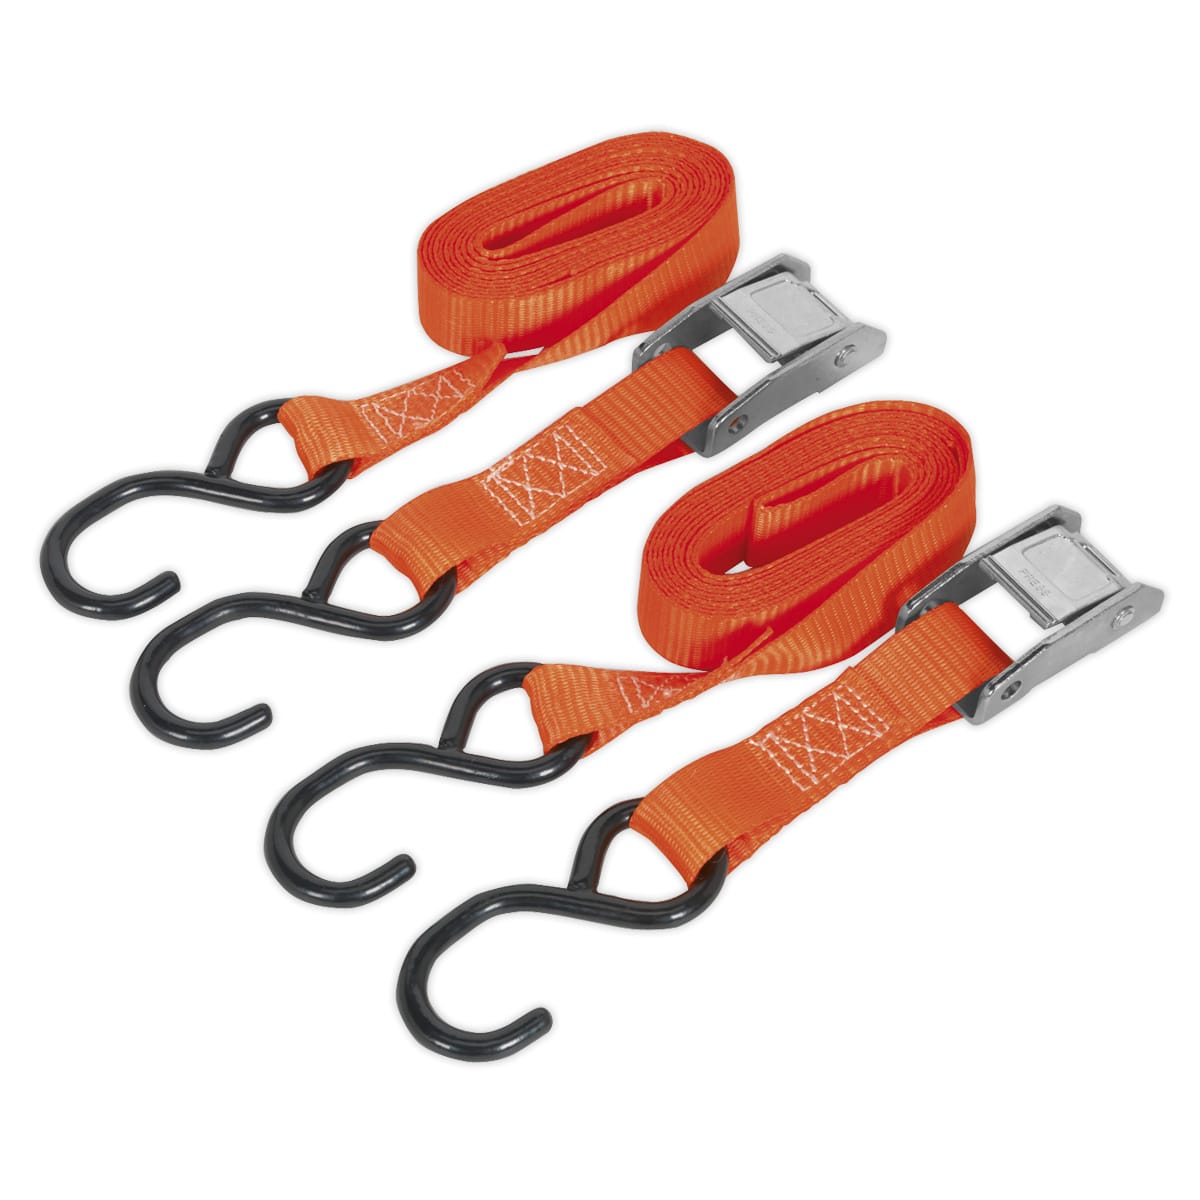 Cam Buckle Tie Down 25mm X 2 5mtr Polyester Webbing With S Hooks 250kg Load Test Triace